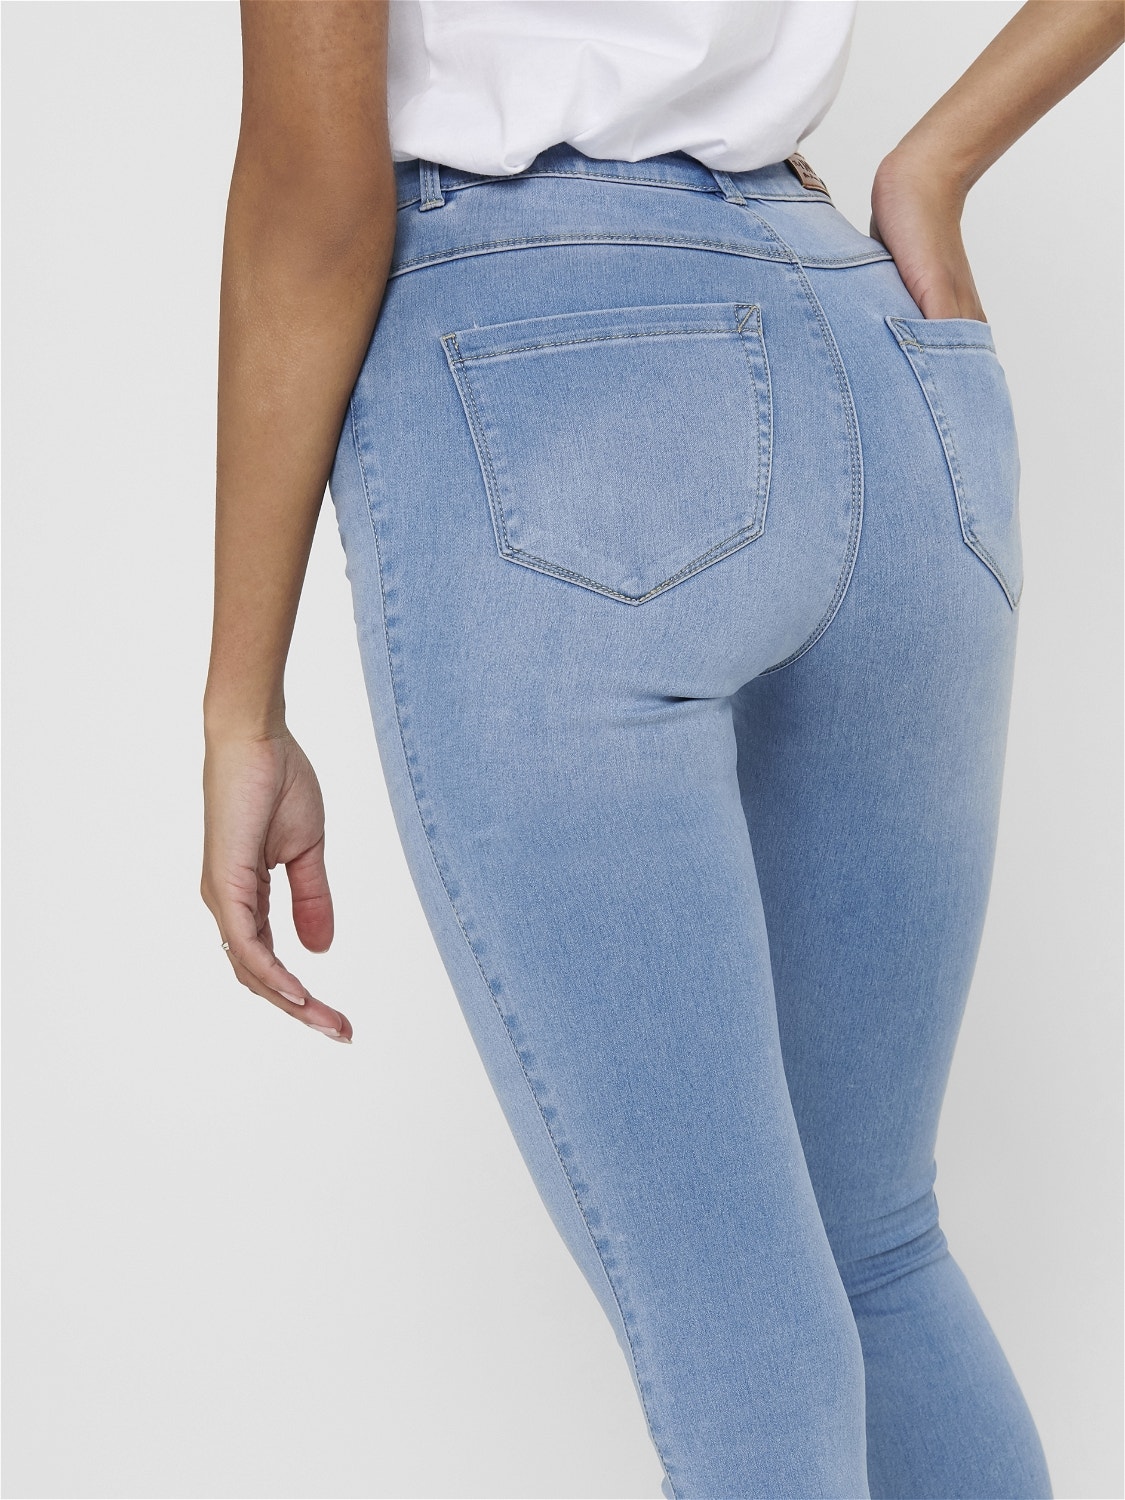 ONLY Skinny Fit Hohe Taille Jeans -Light Blue Denim - 15169037